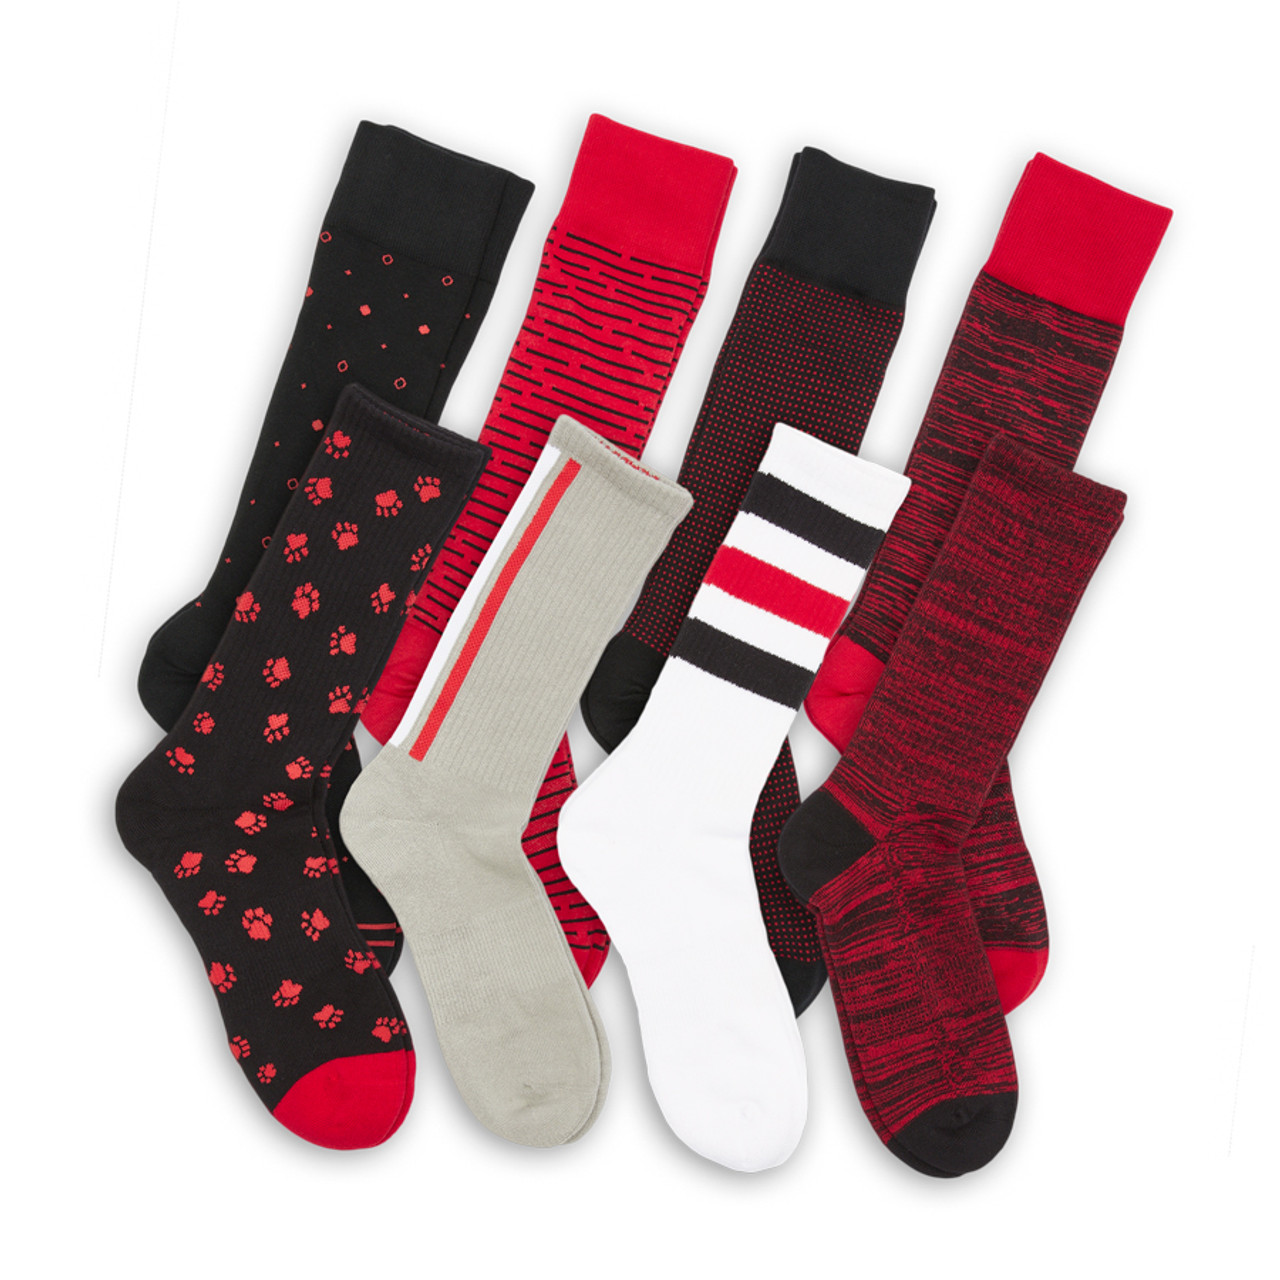 Trendy transparent socks with black and red stripes - DIM Style Sporty Look